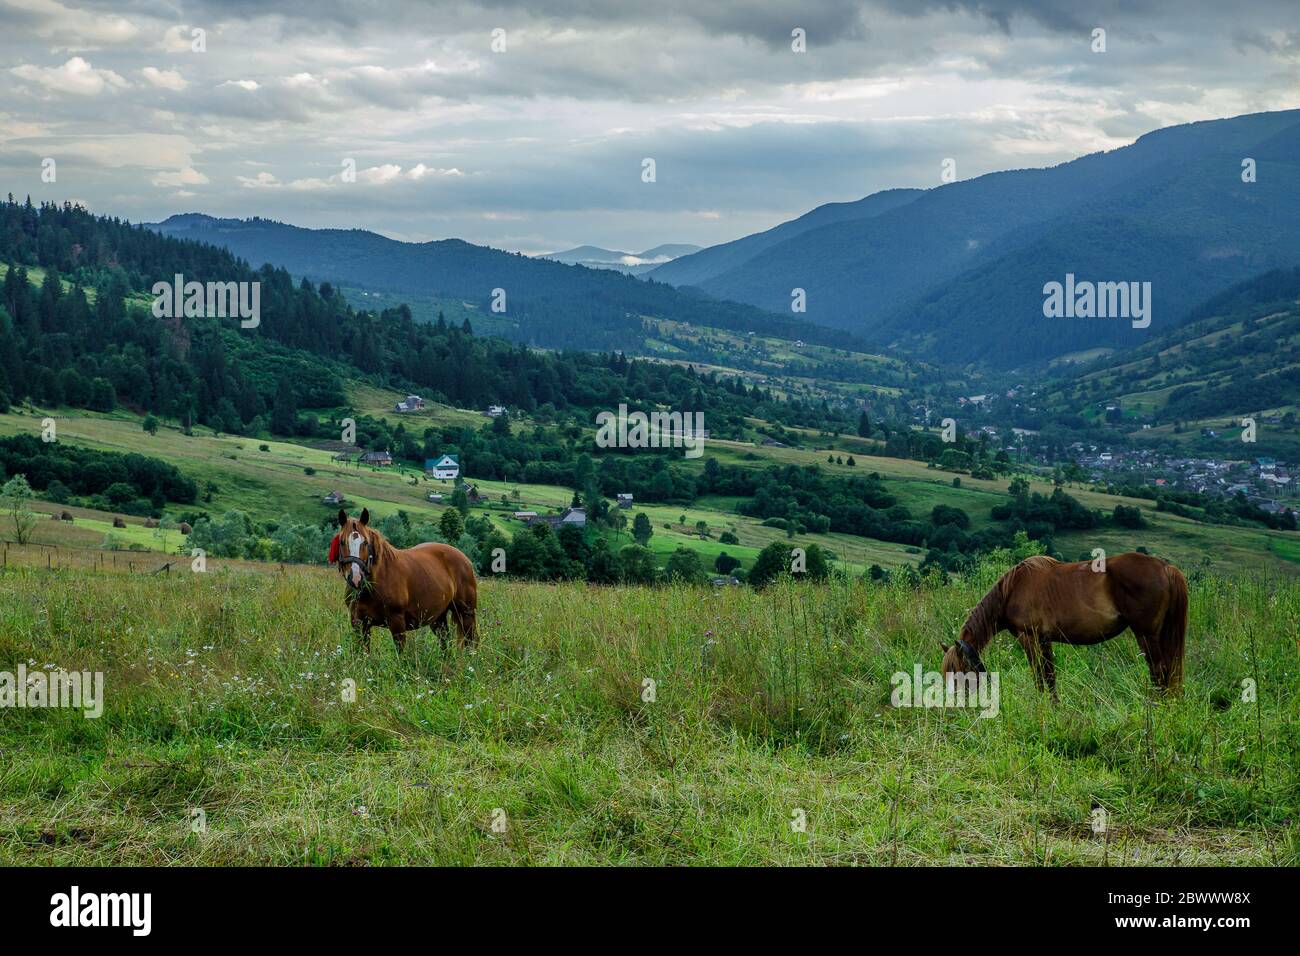 Horses on a beautiful pasture in the mountains Stock Photo